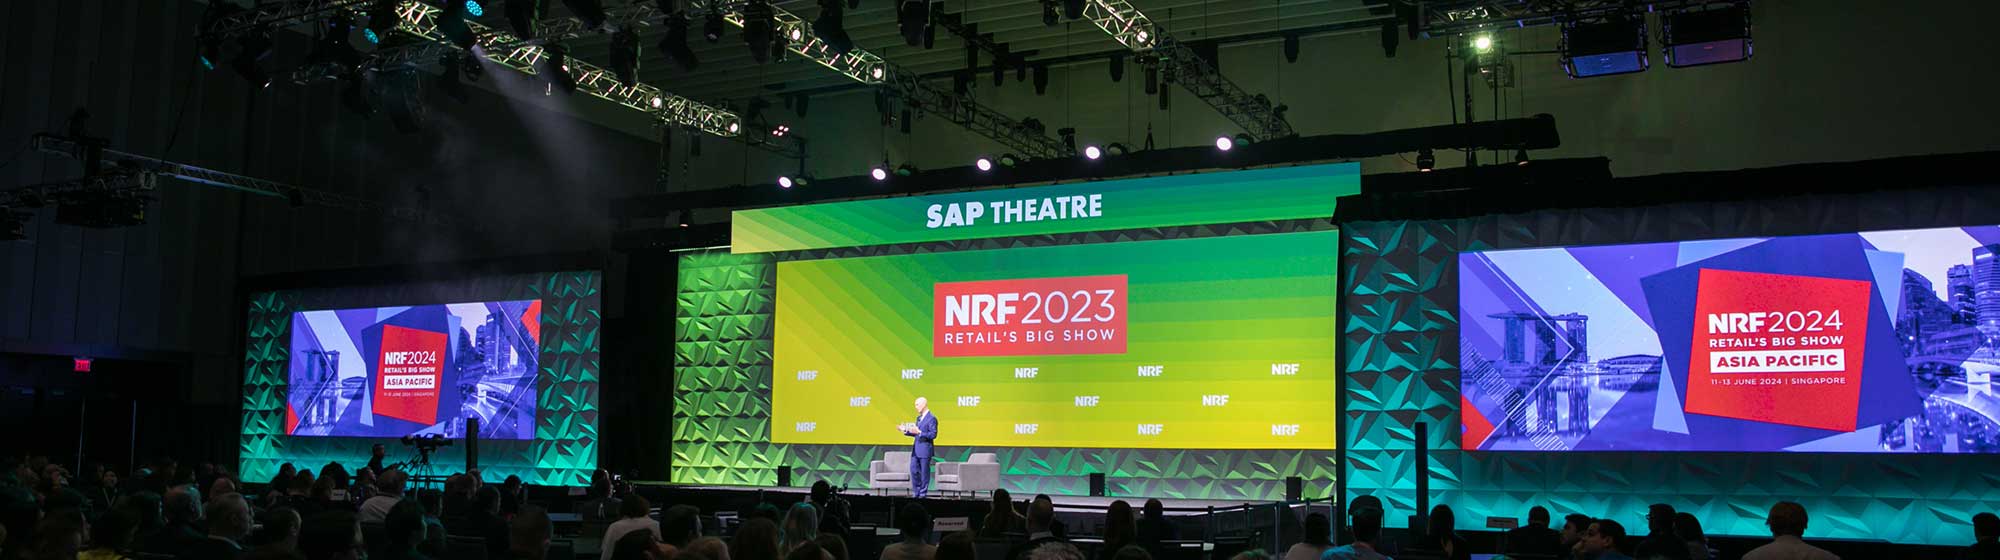 Picture of the NRF Retail’s Big Show 2023 held at New York